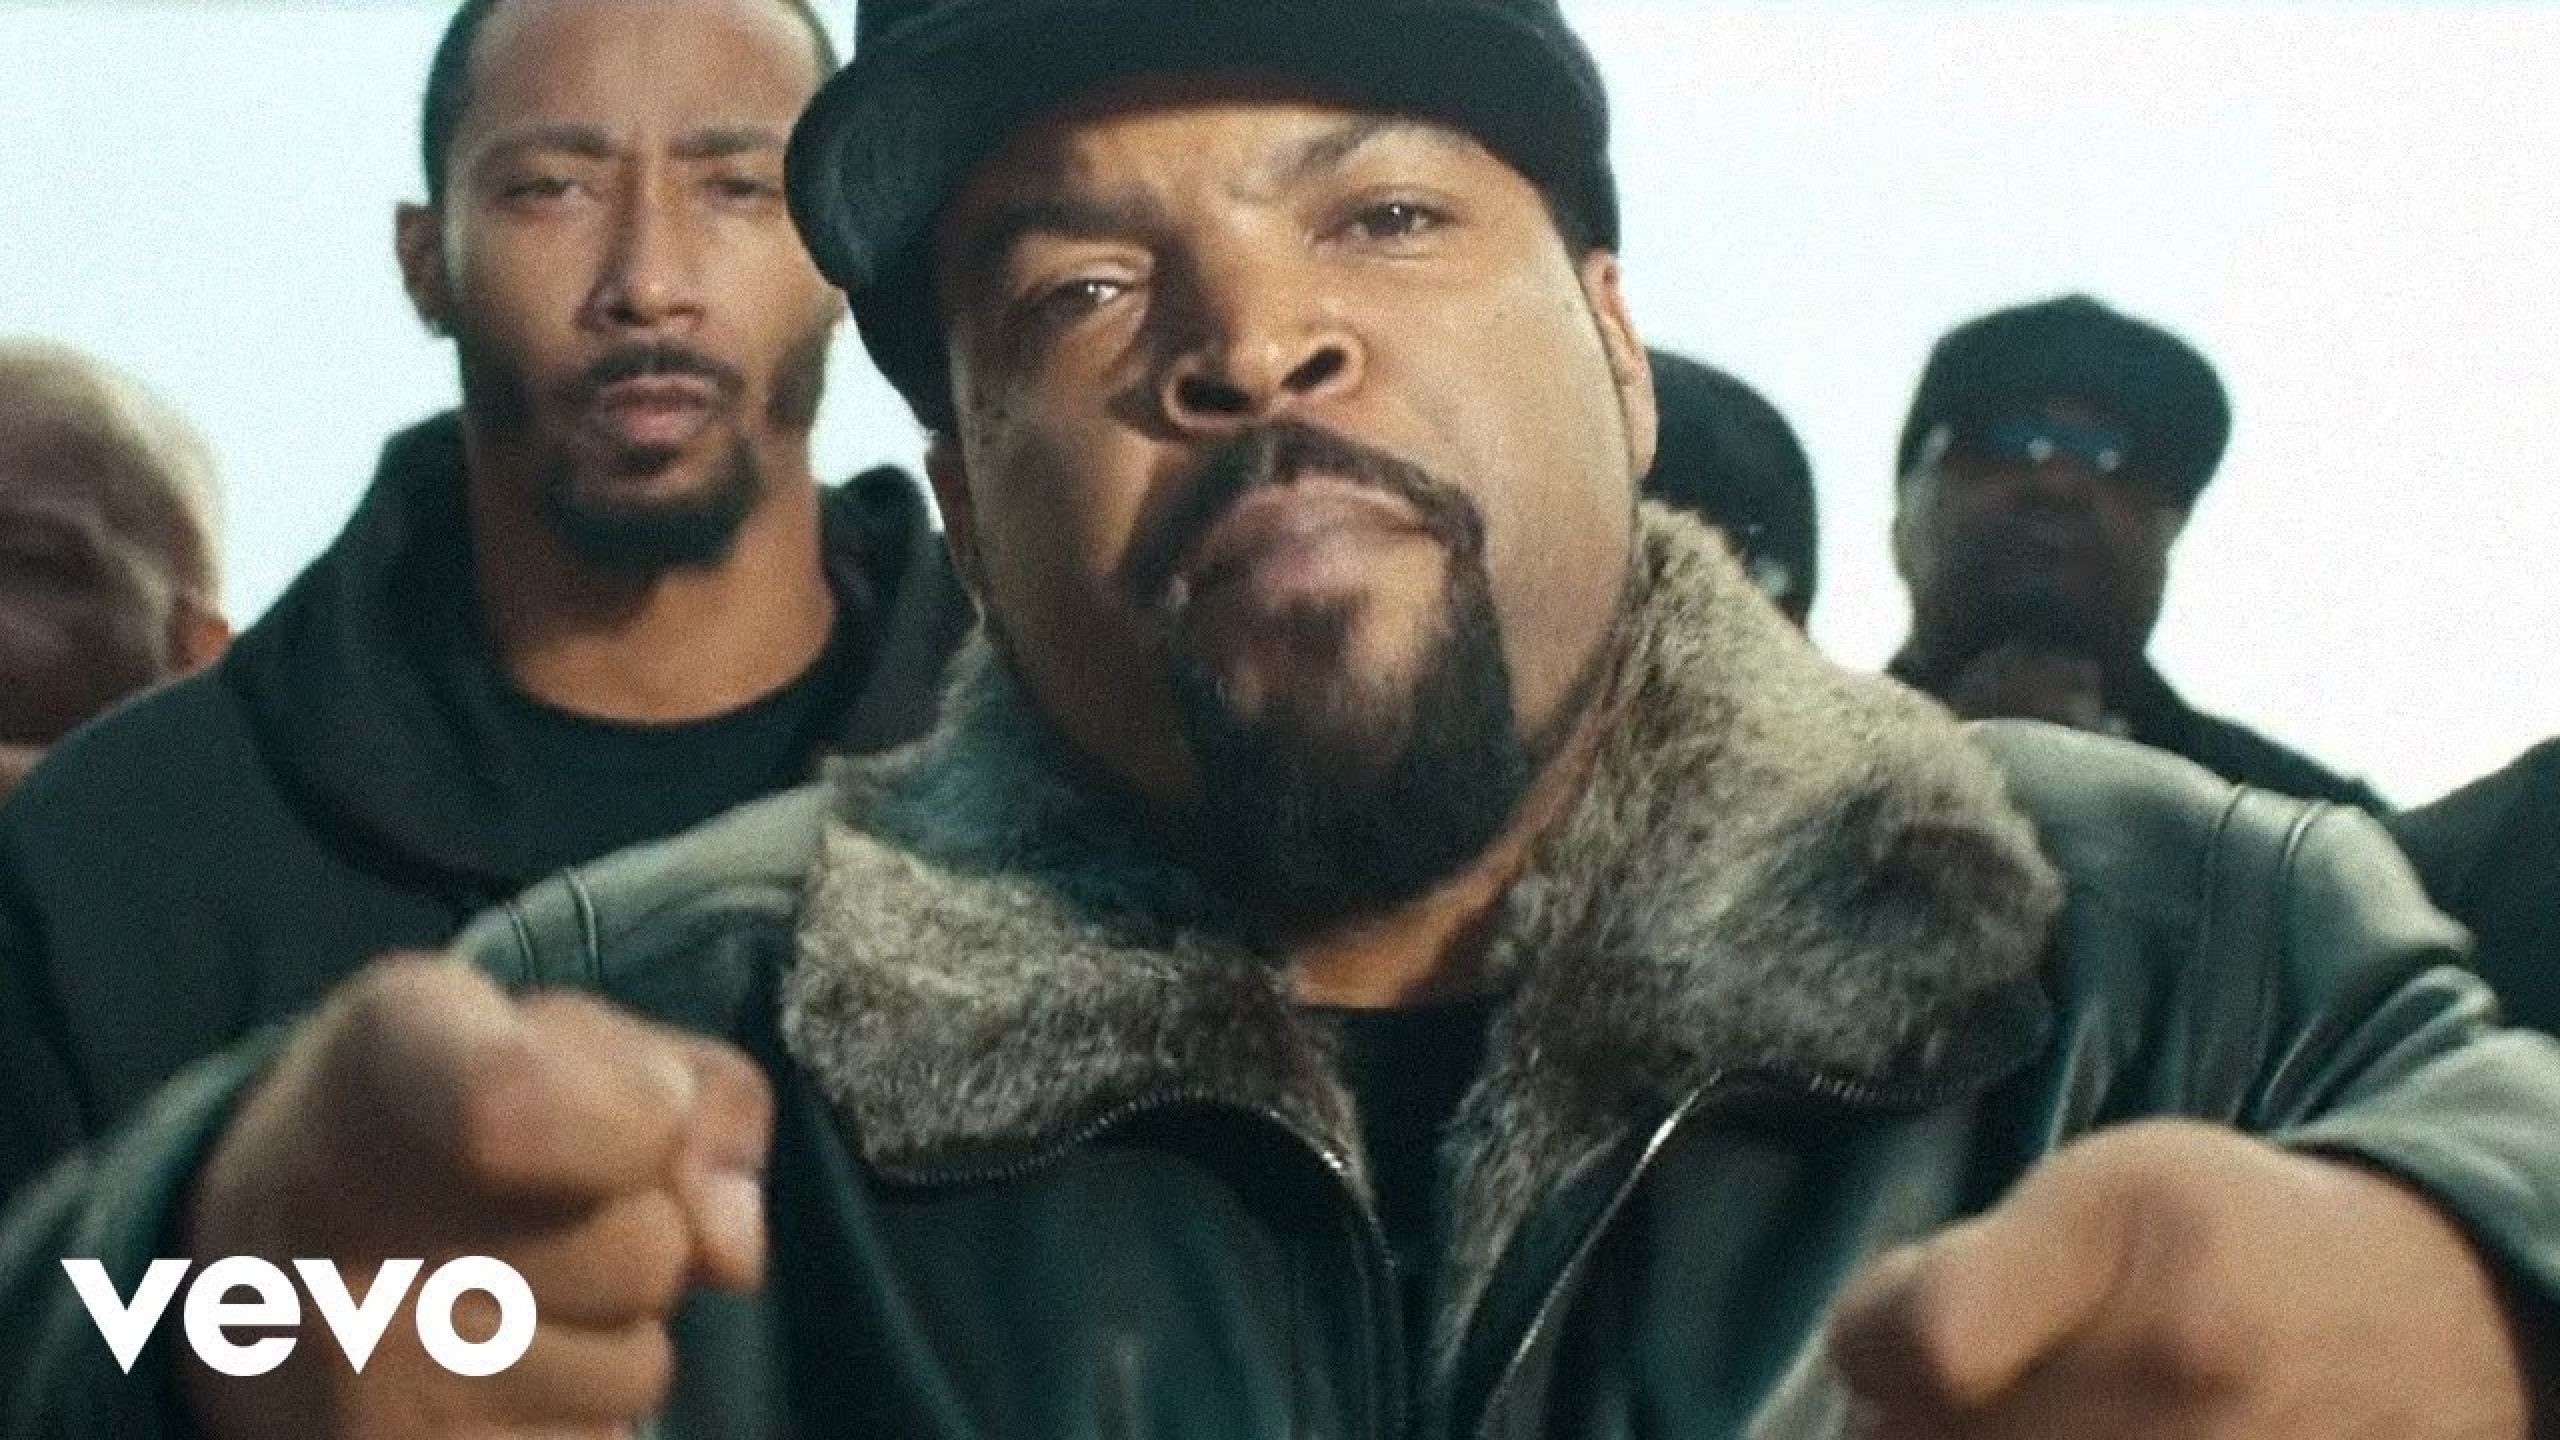 Ice cube down down. Ice Cube КФЗ. Ice Cube DMX. Ice Cube Sweet. Ice Cube Green back.